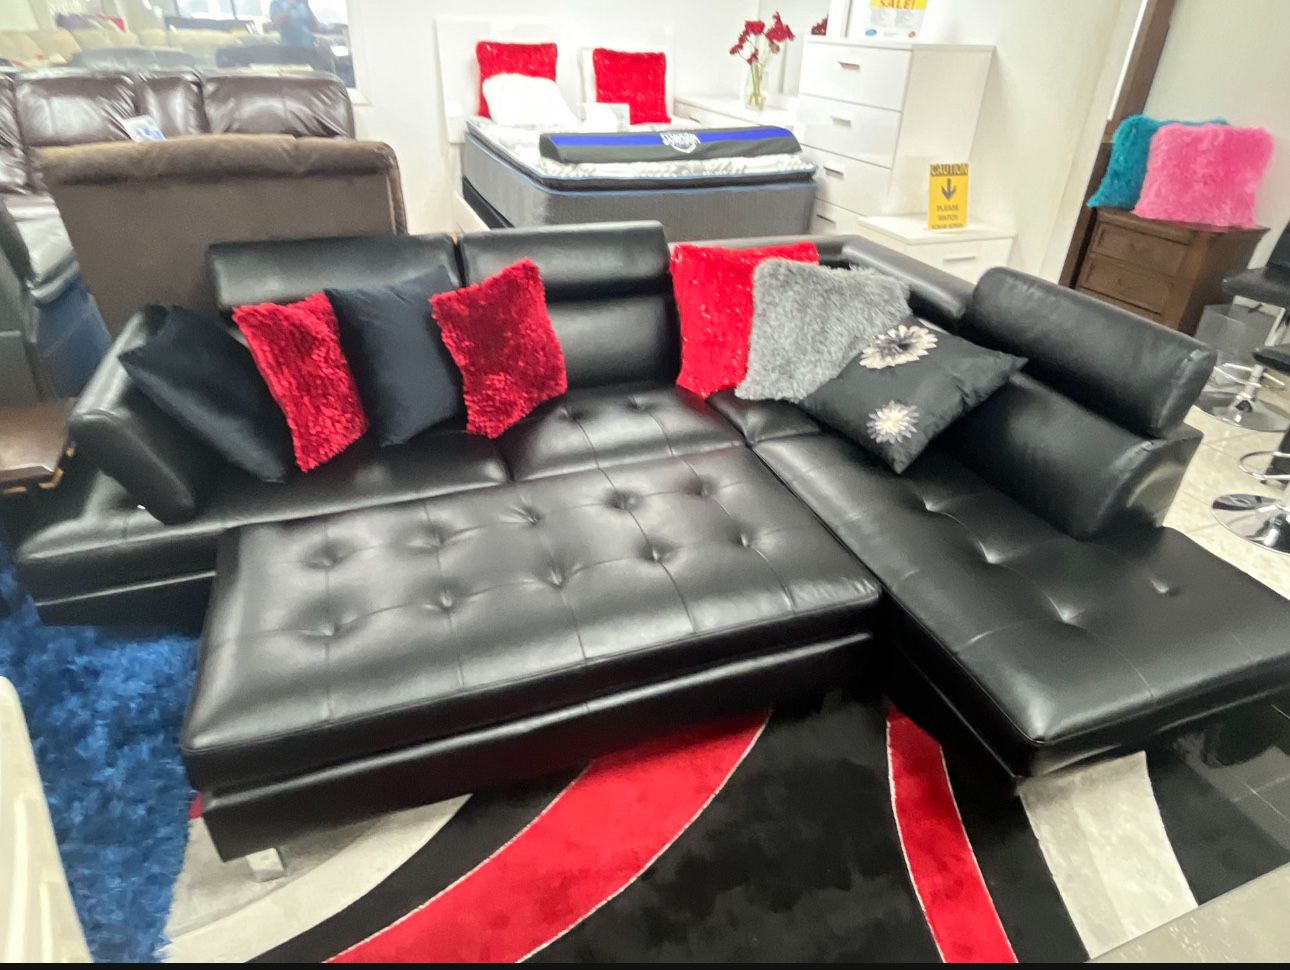 COMFY NEW IBIZA SECTIONAL SOFA AND OTTOMAN SET ON SALE ONLY $699. IN STOCK SAME DAY DELIVERY 🚚 EASY FINANCING 